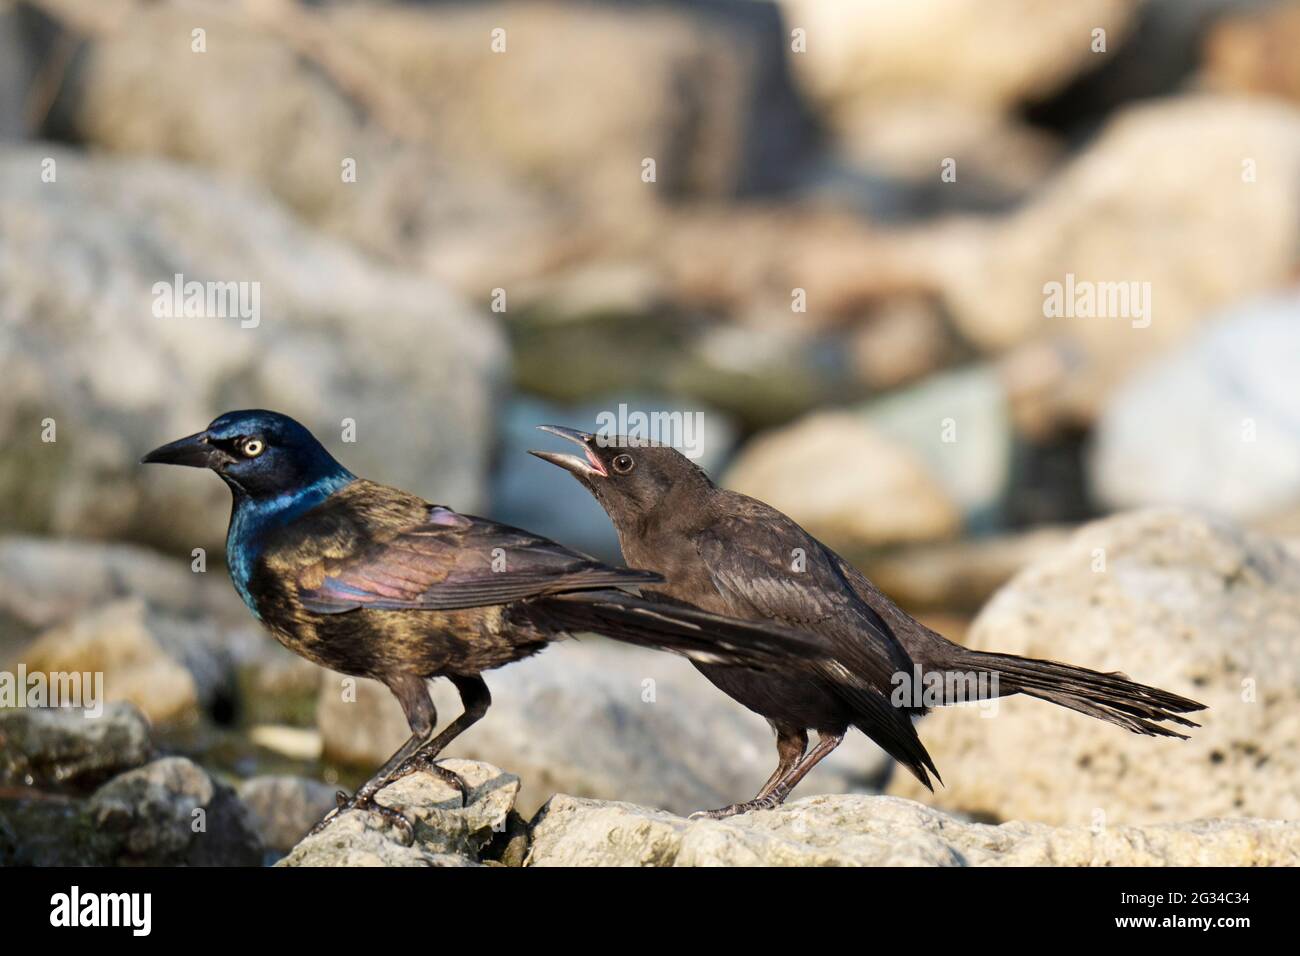 Young  Immature Common Grackle (Quiscalus quiscula) with Parent, Adult Bird Stock Photo